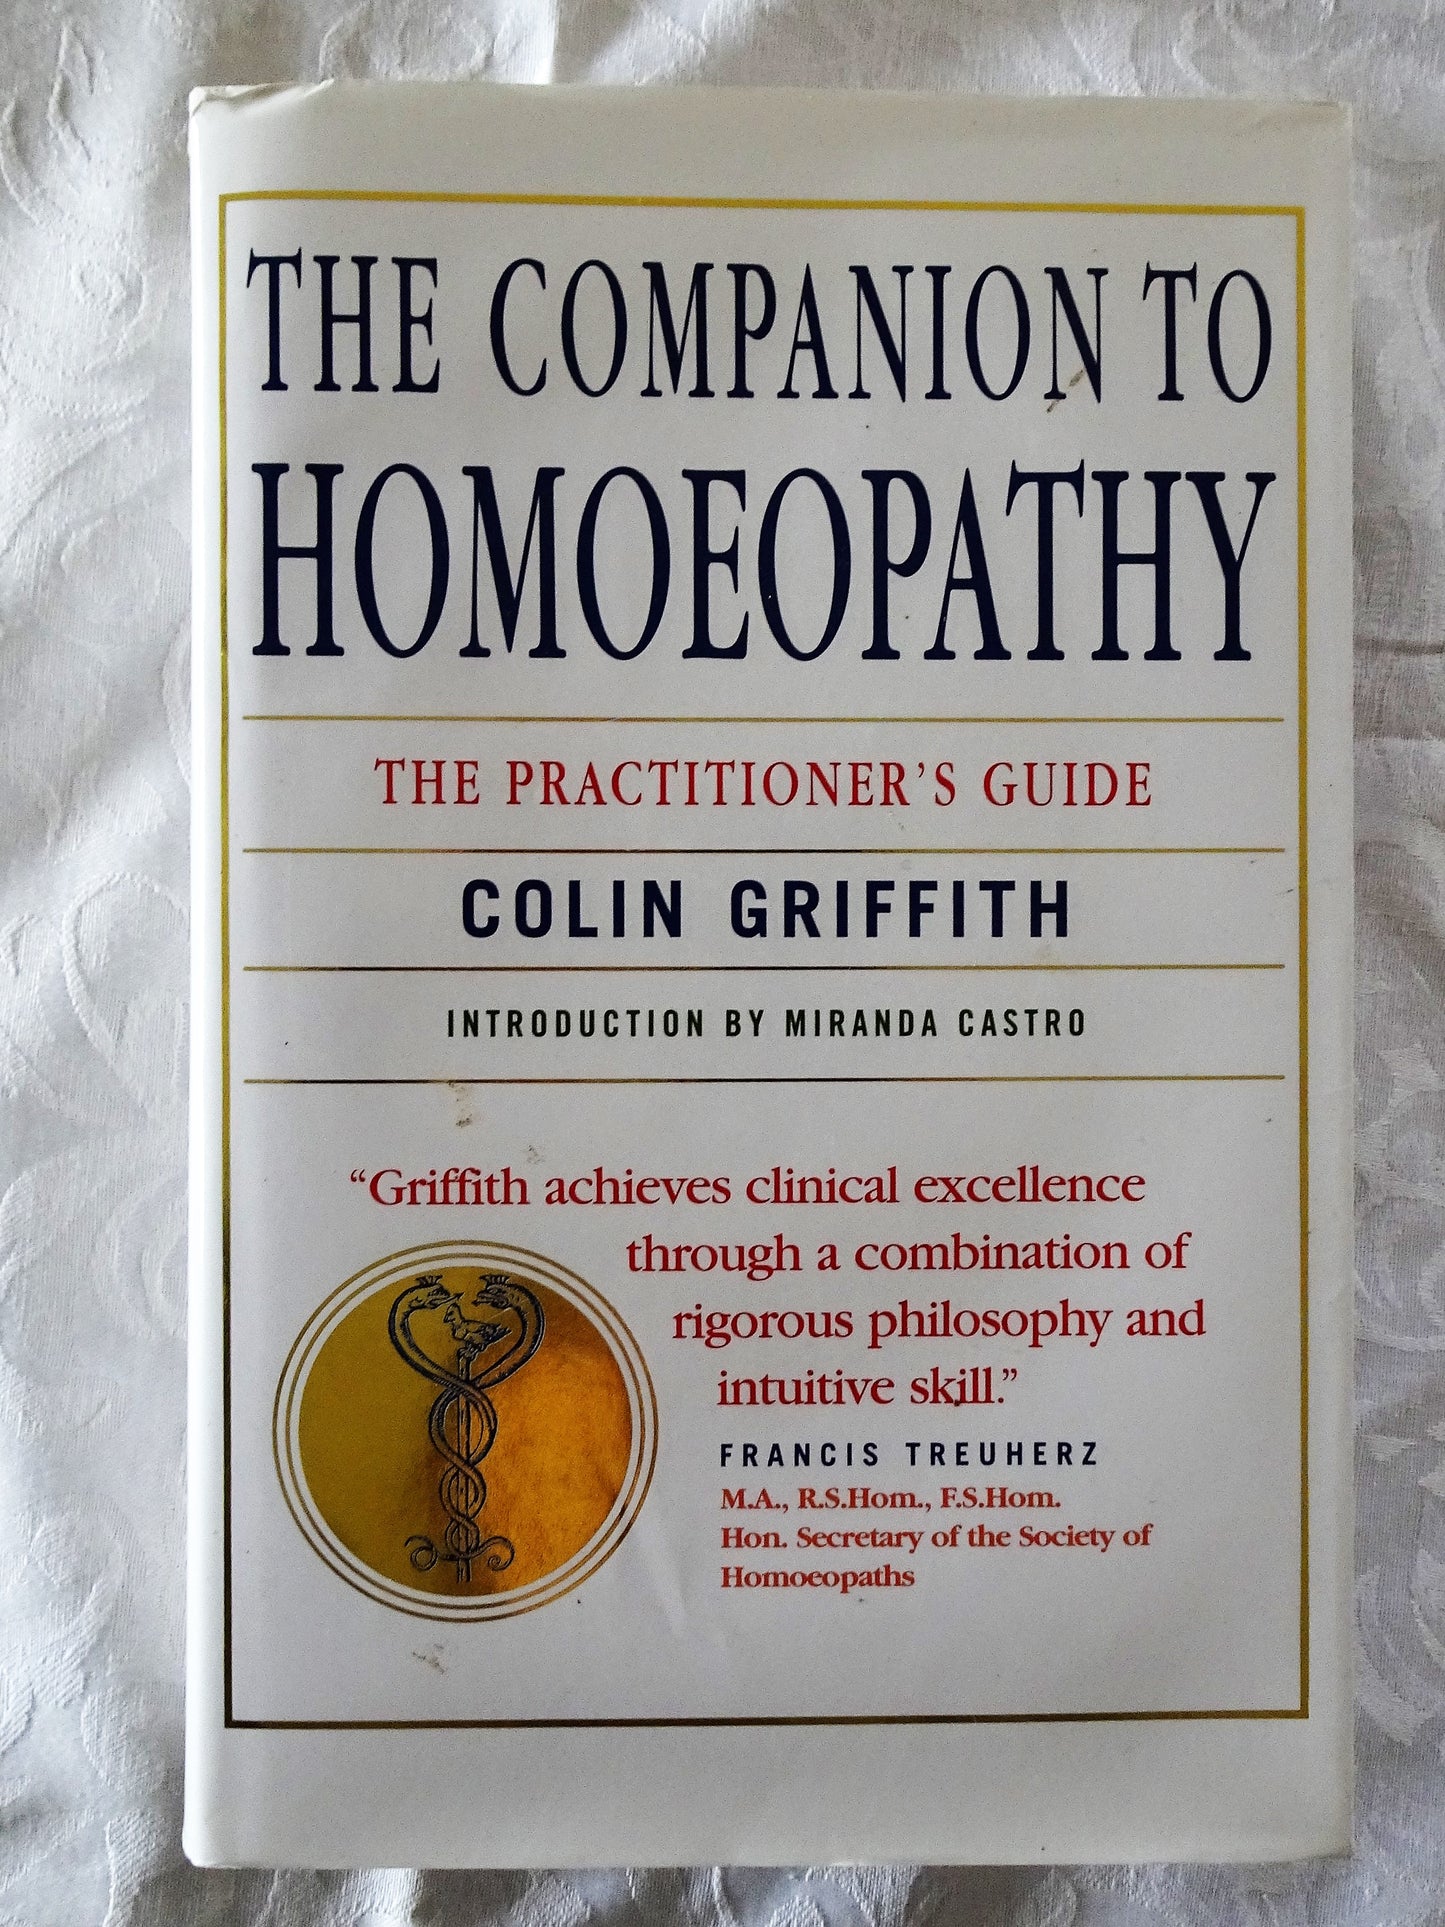 The Companion to Homoeopathy by Colin Griffith